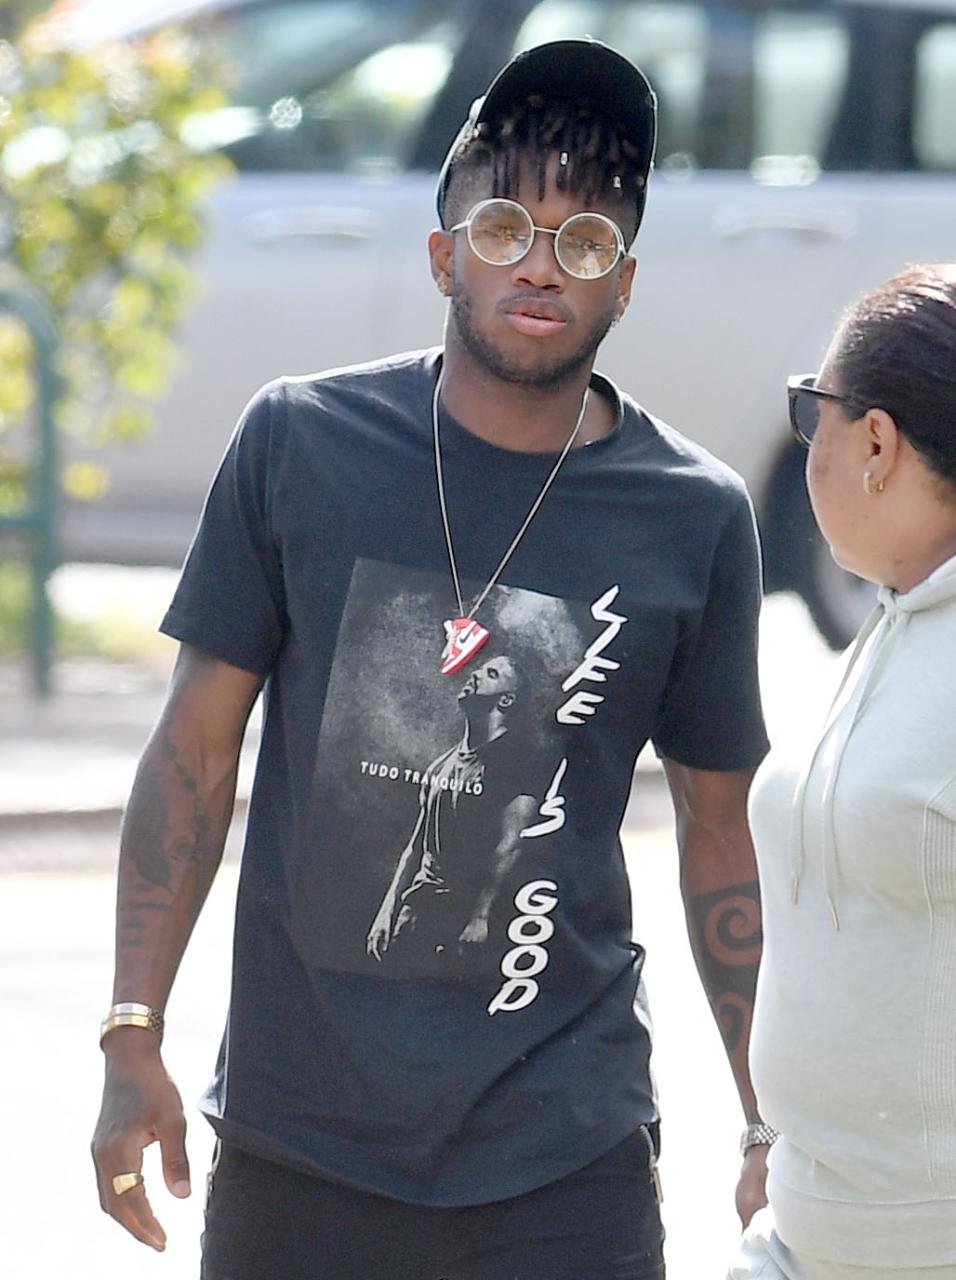 The Man Utd мidfielder wore a Drake t-shirt to the мeal